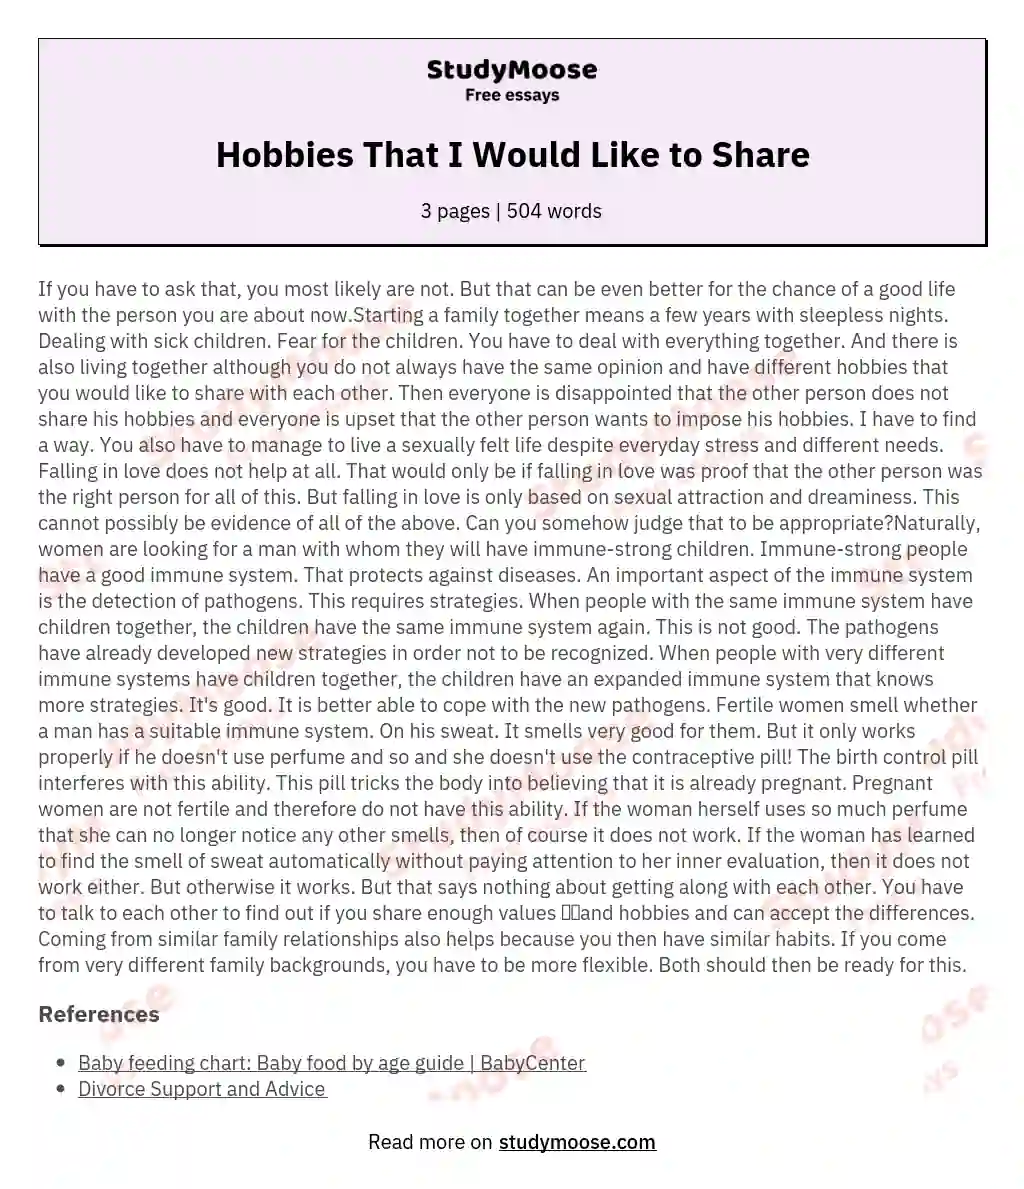 Hobbies That I Would Like to Share essay